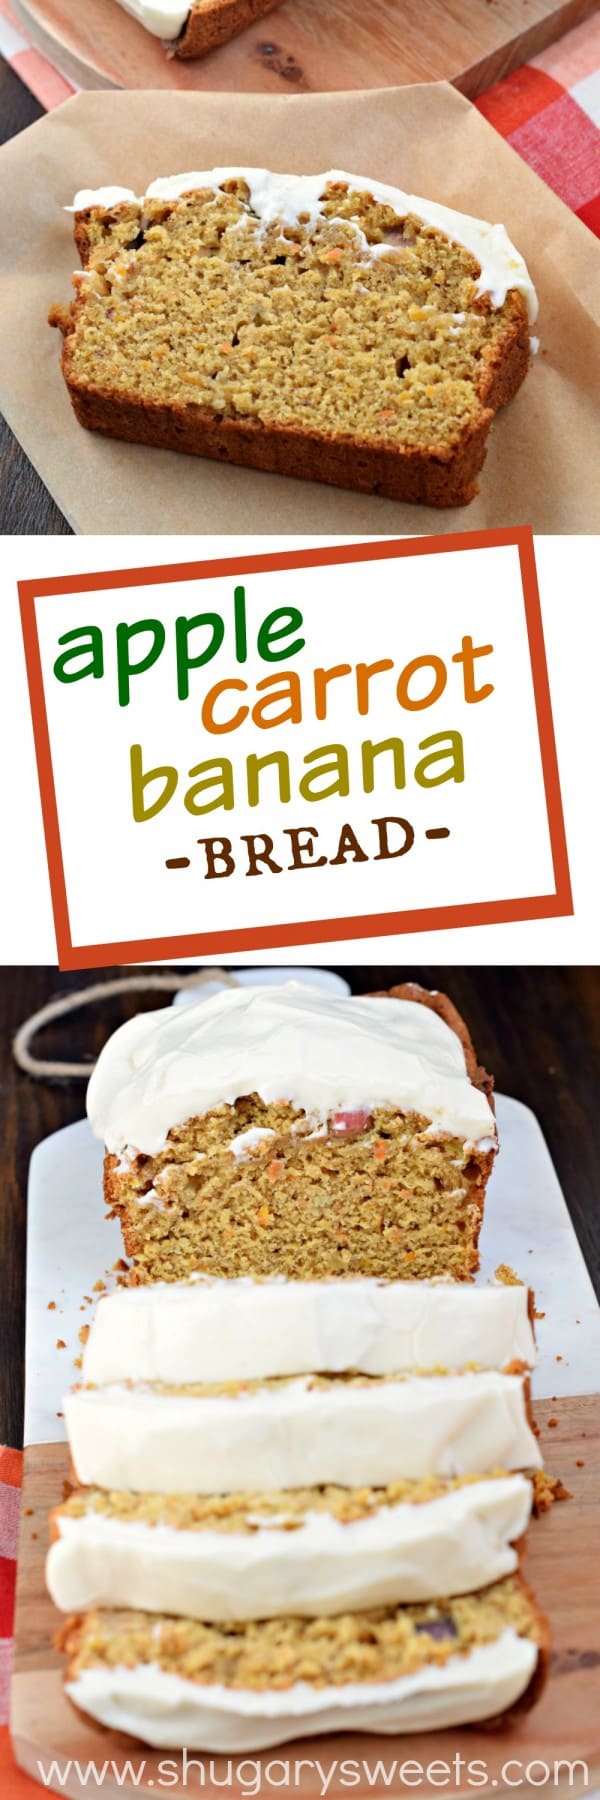 As if this Apple Banana Carrot Bread wasn't sweet enough, adding the cream cheese frosting takes this bread recipe to a whole new delicious level!